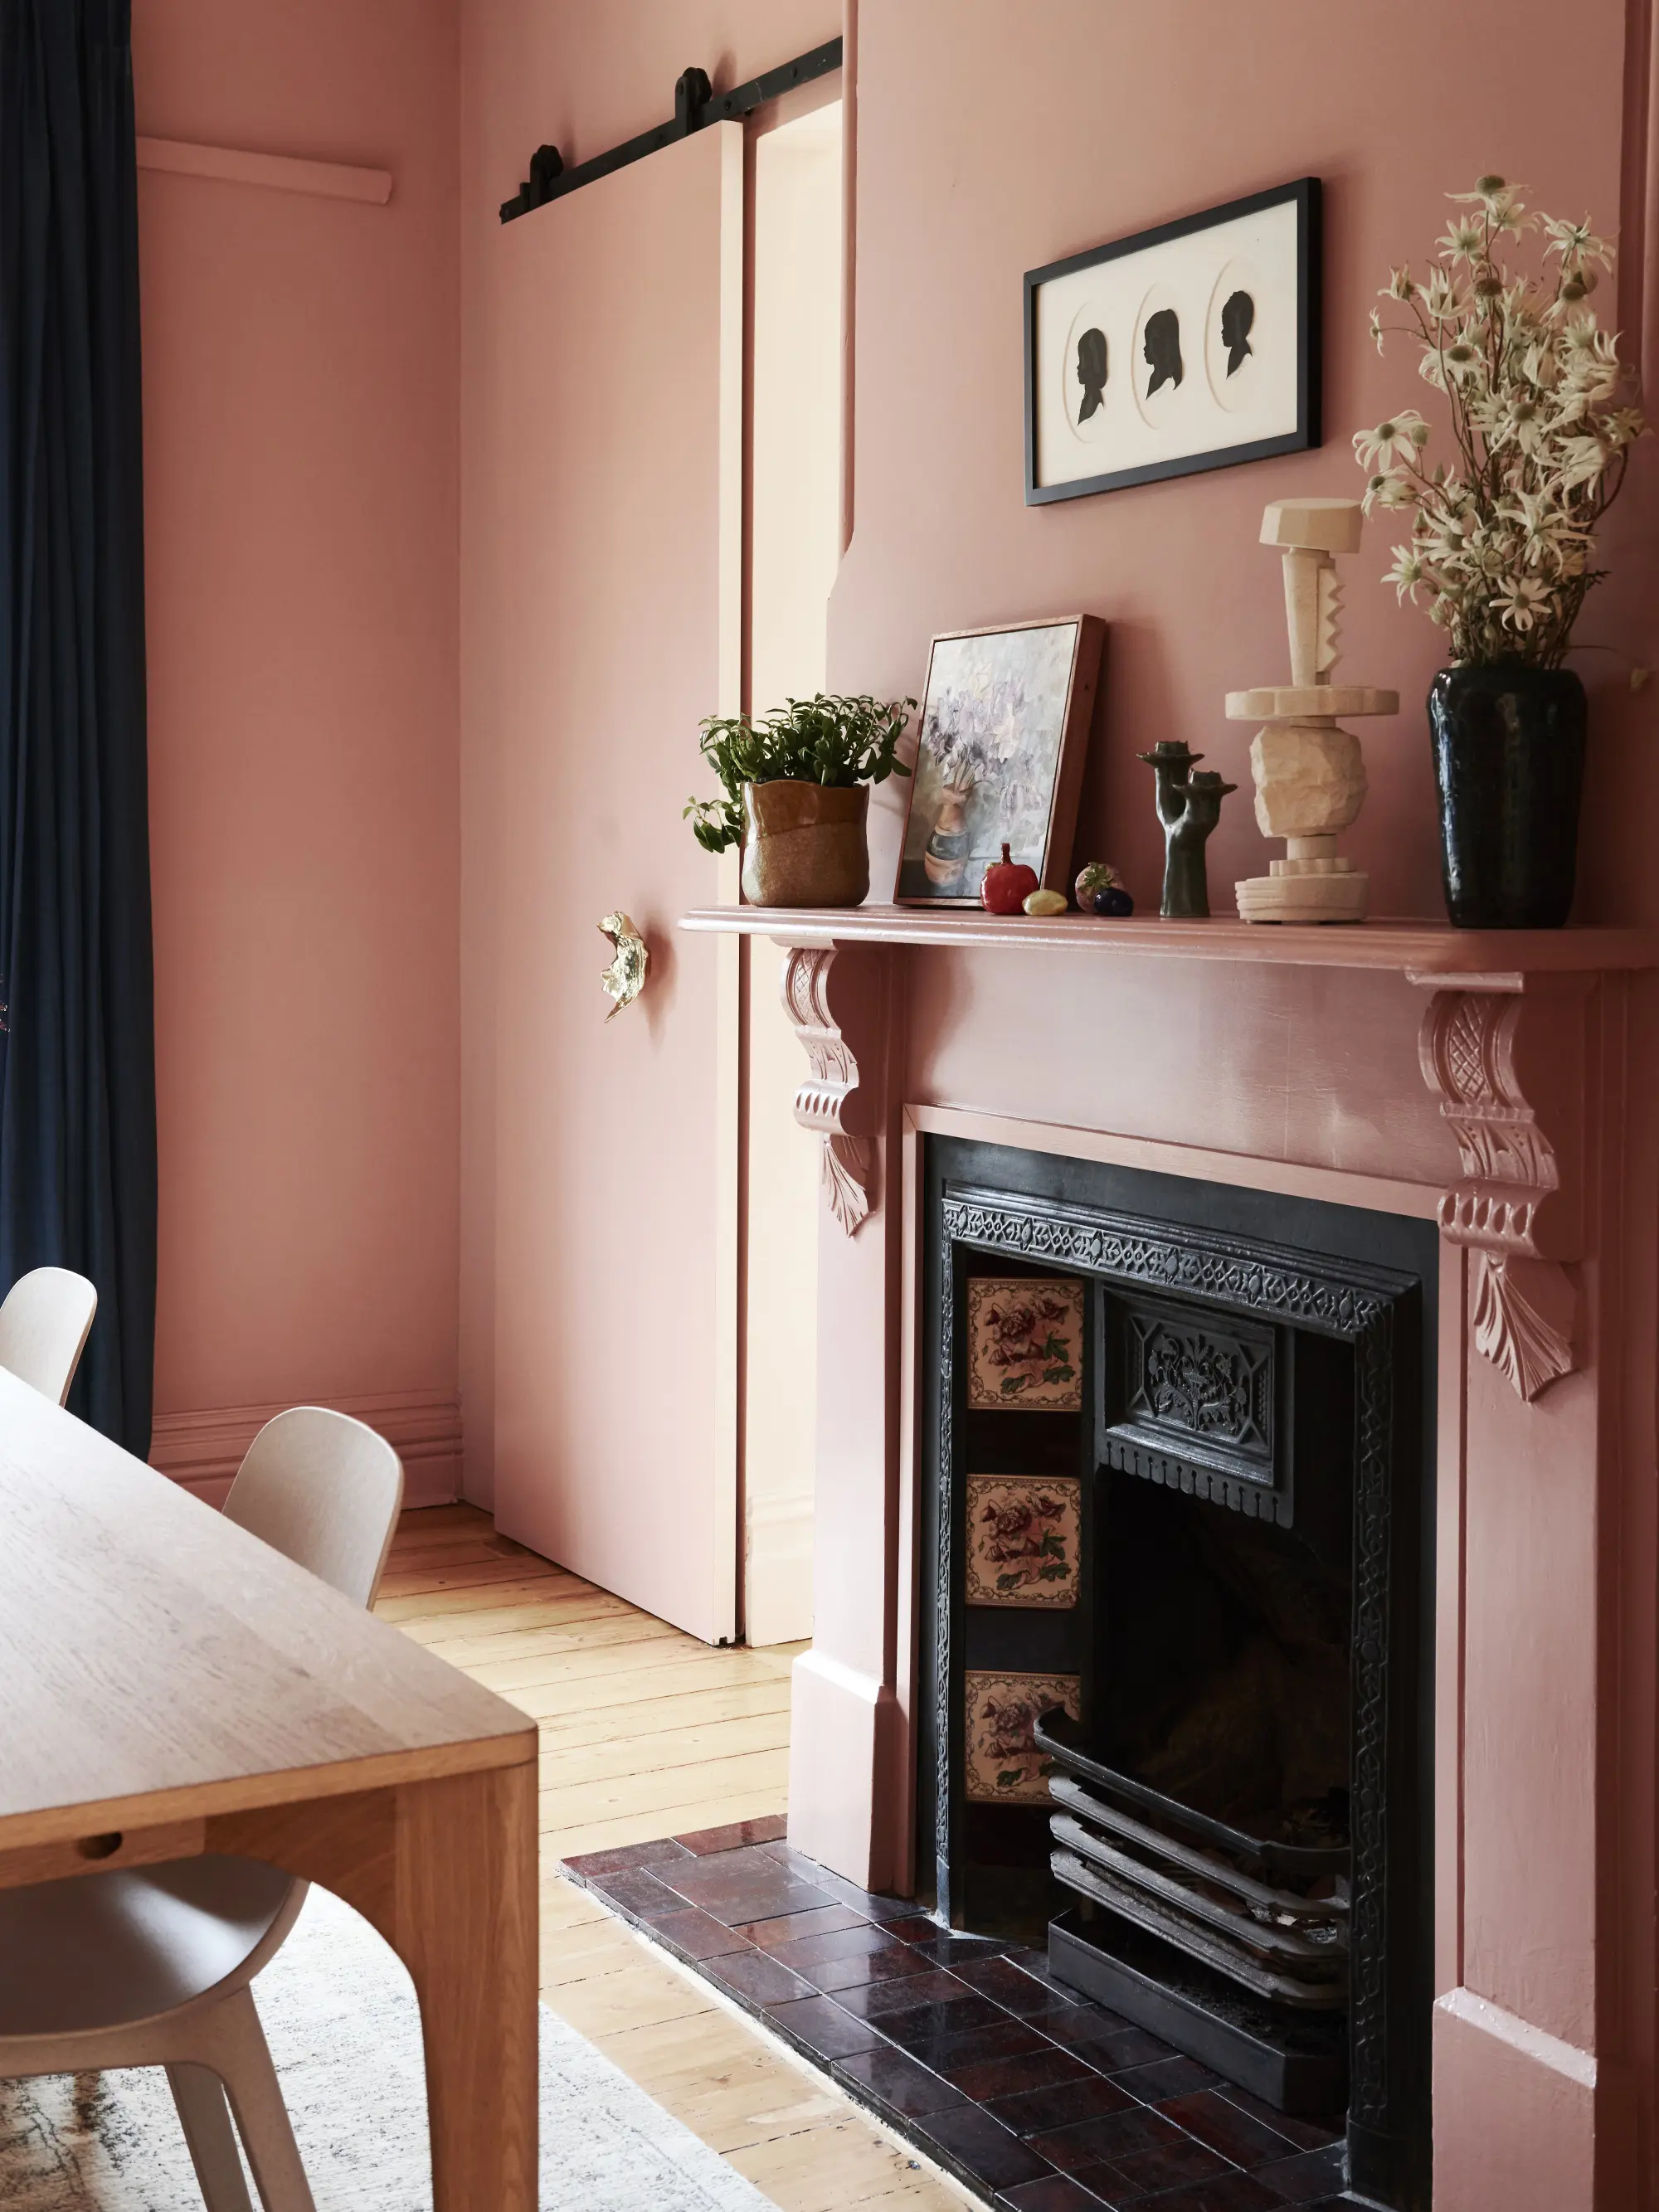 A dining room with fireplace. The walls and fireplace surrounding are all painted a dusky pink colour